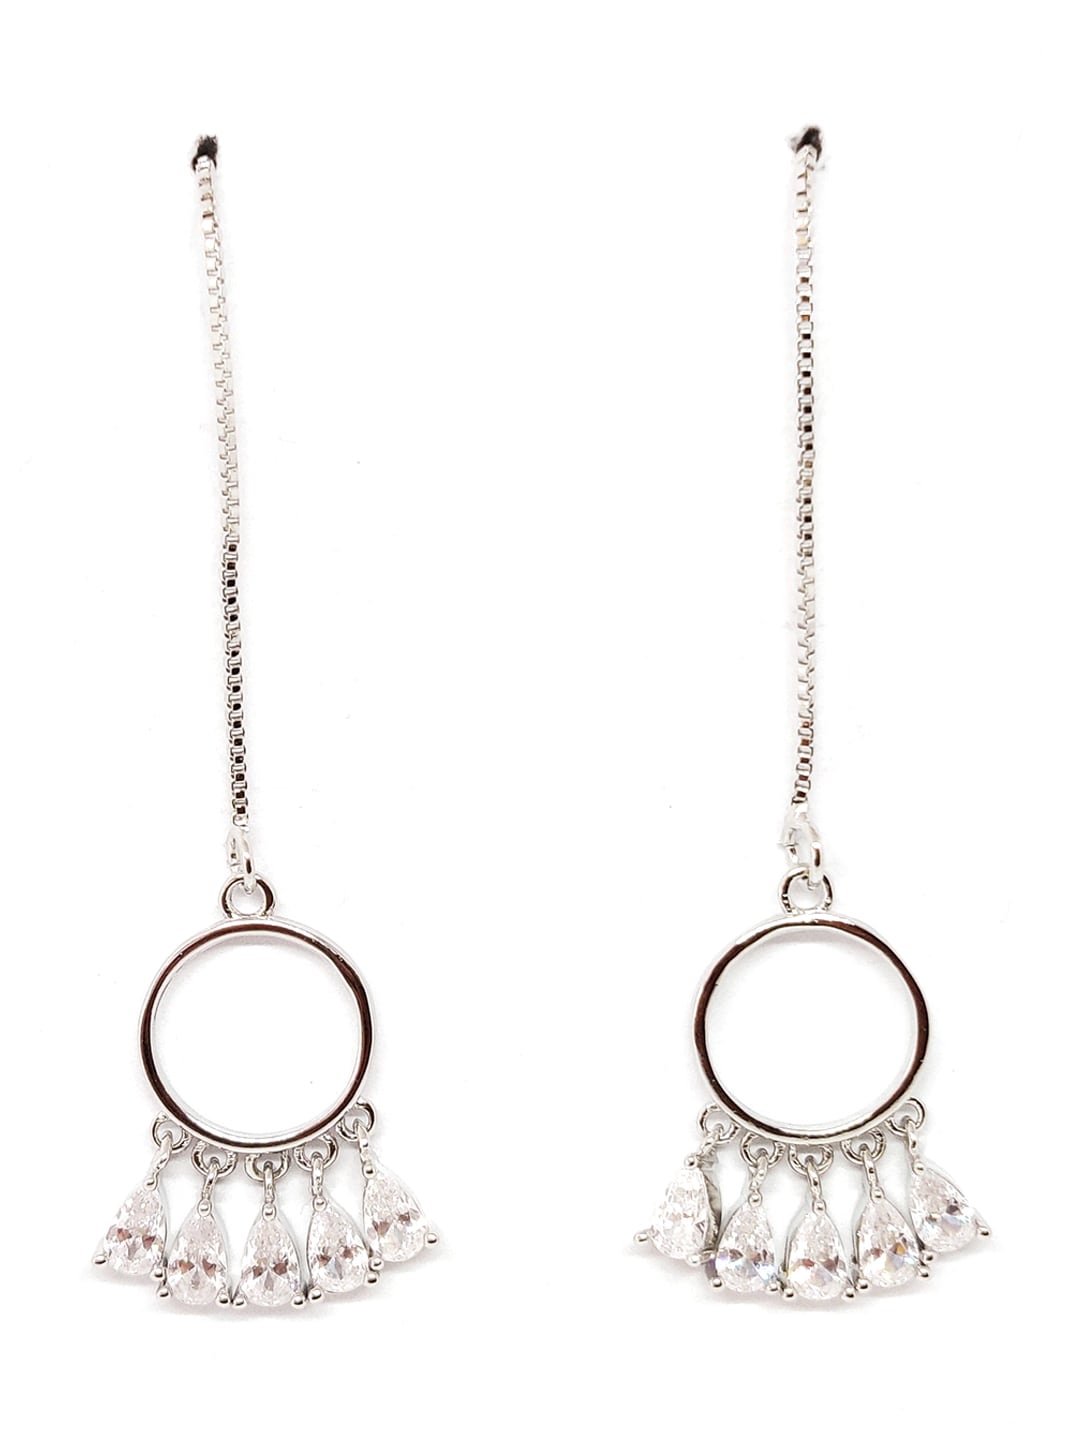 EL REGALO Silver-Toned Circular Drop Earrings - for Women and Girls
Style ID: 16770280